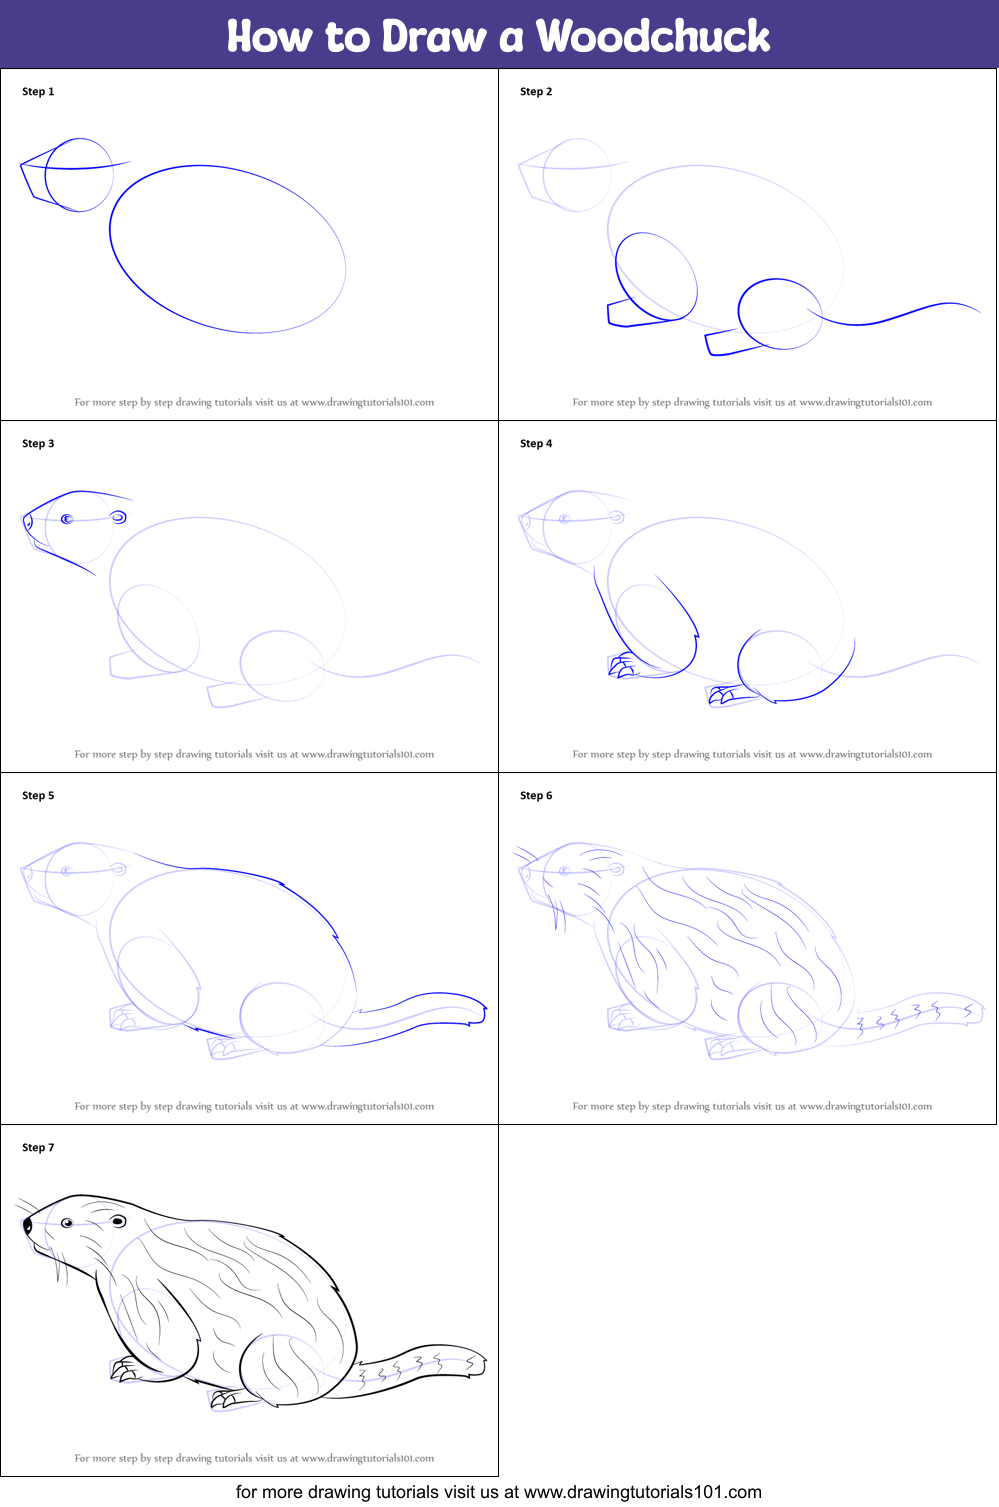 How to Draw a Woodchuck printable step by step drawing sheet